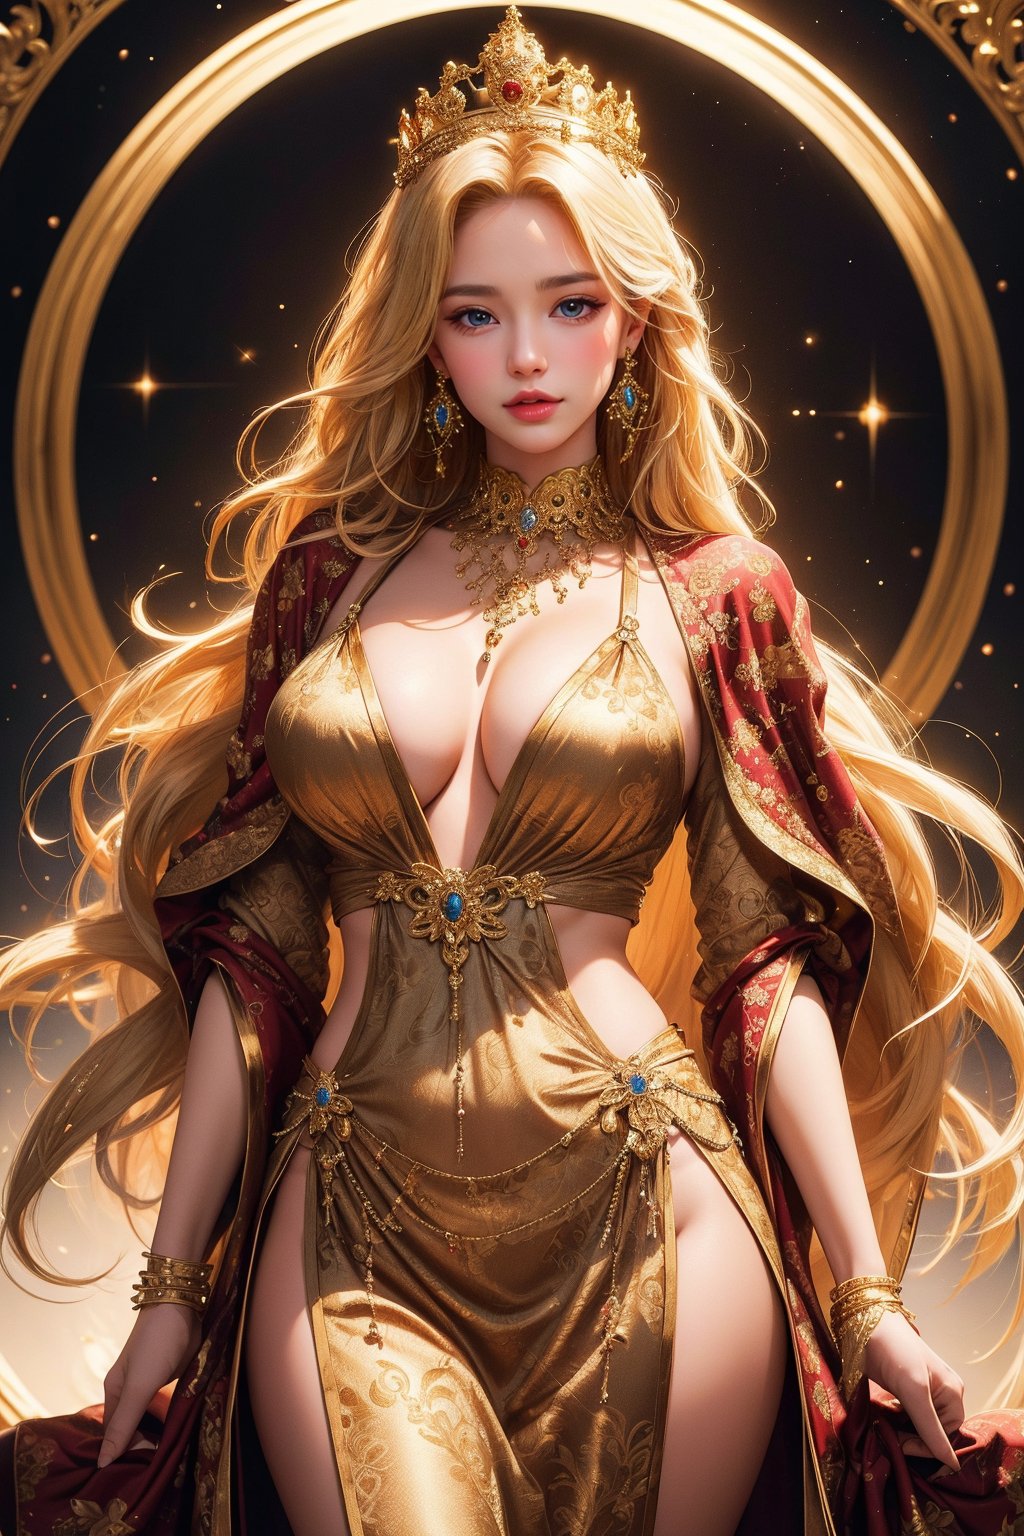 busty and sexy girl, 8k, masterpiece, ultra-realistic, best quality, high resolution, high definition,dressed in an elaborate, ornate costume, CROWN, JEWELRY,blonde,majestic aura,The costume is richly detailed with gold and dark tones,The background features decorative circular patterns that radiate outward,There is a glow around the figure, which gives an ethereal feel to the image,GQ